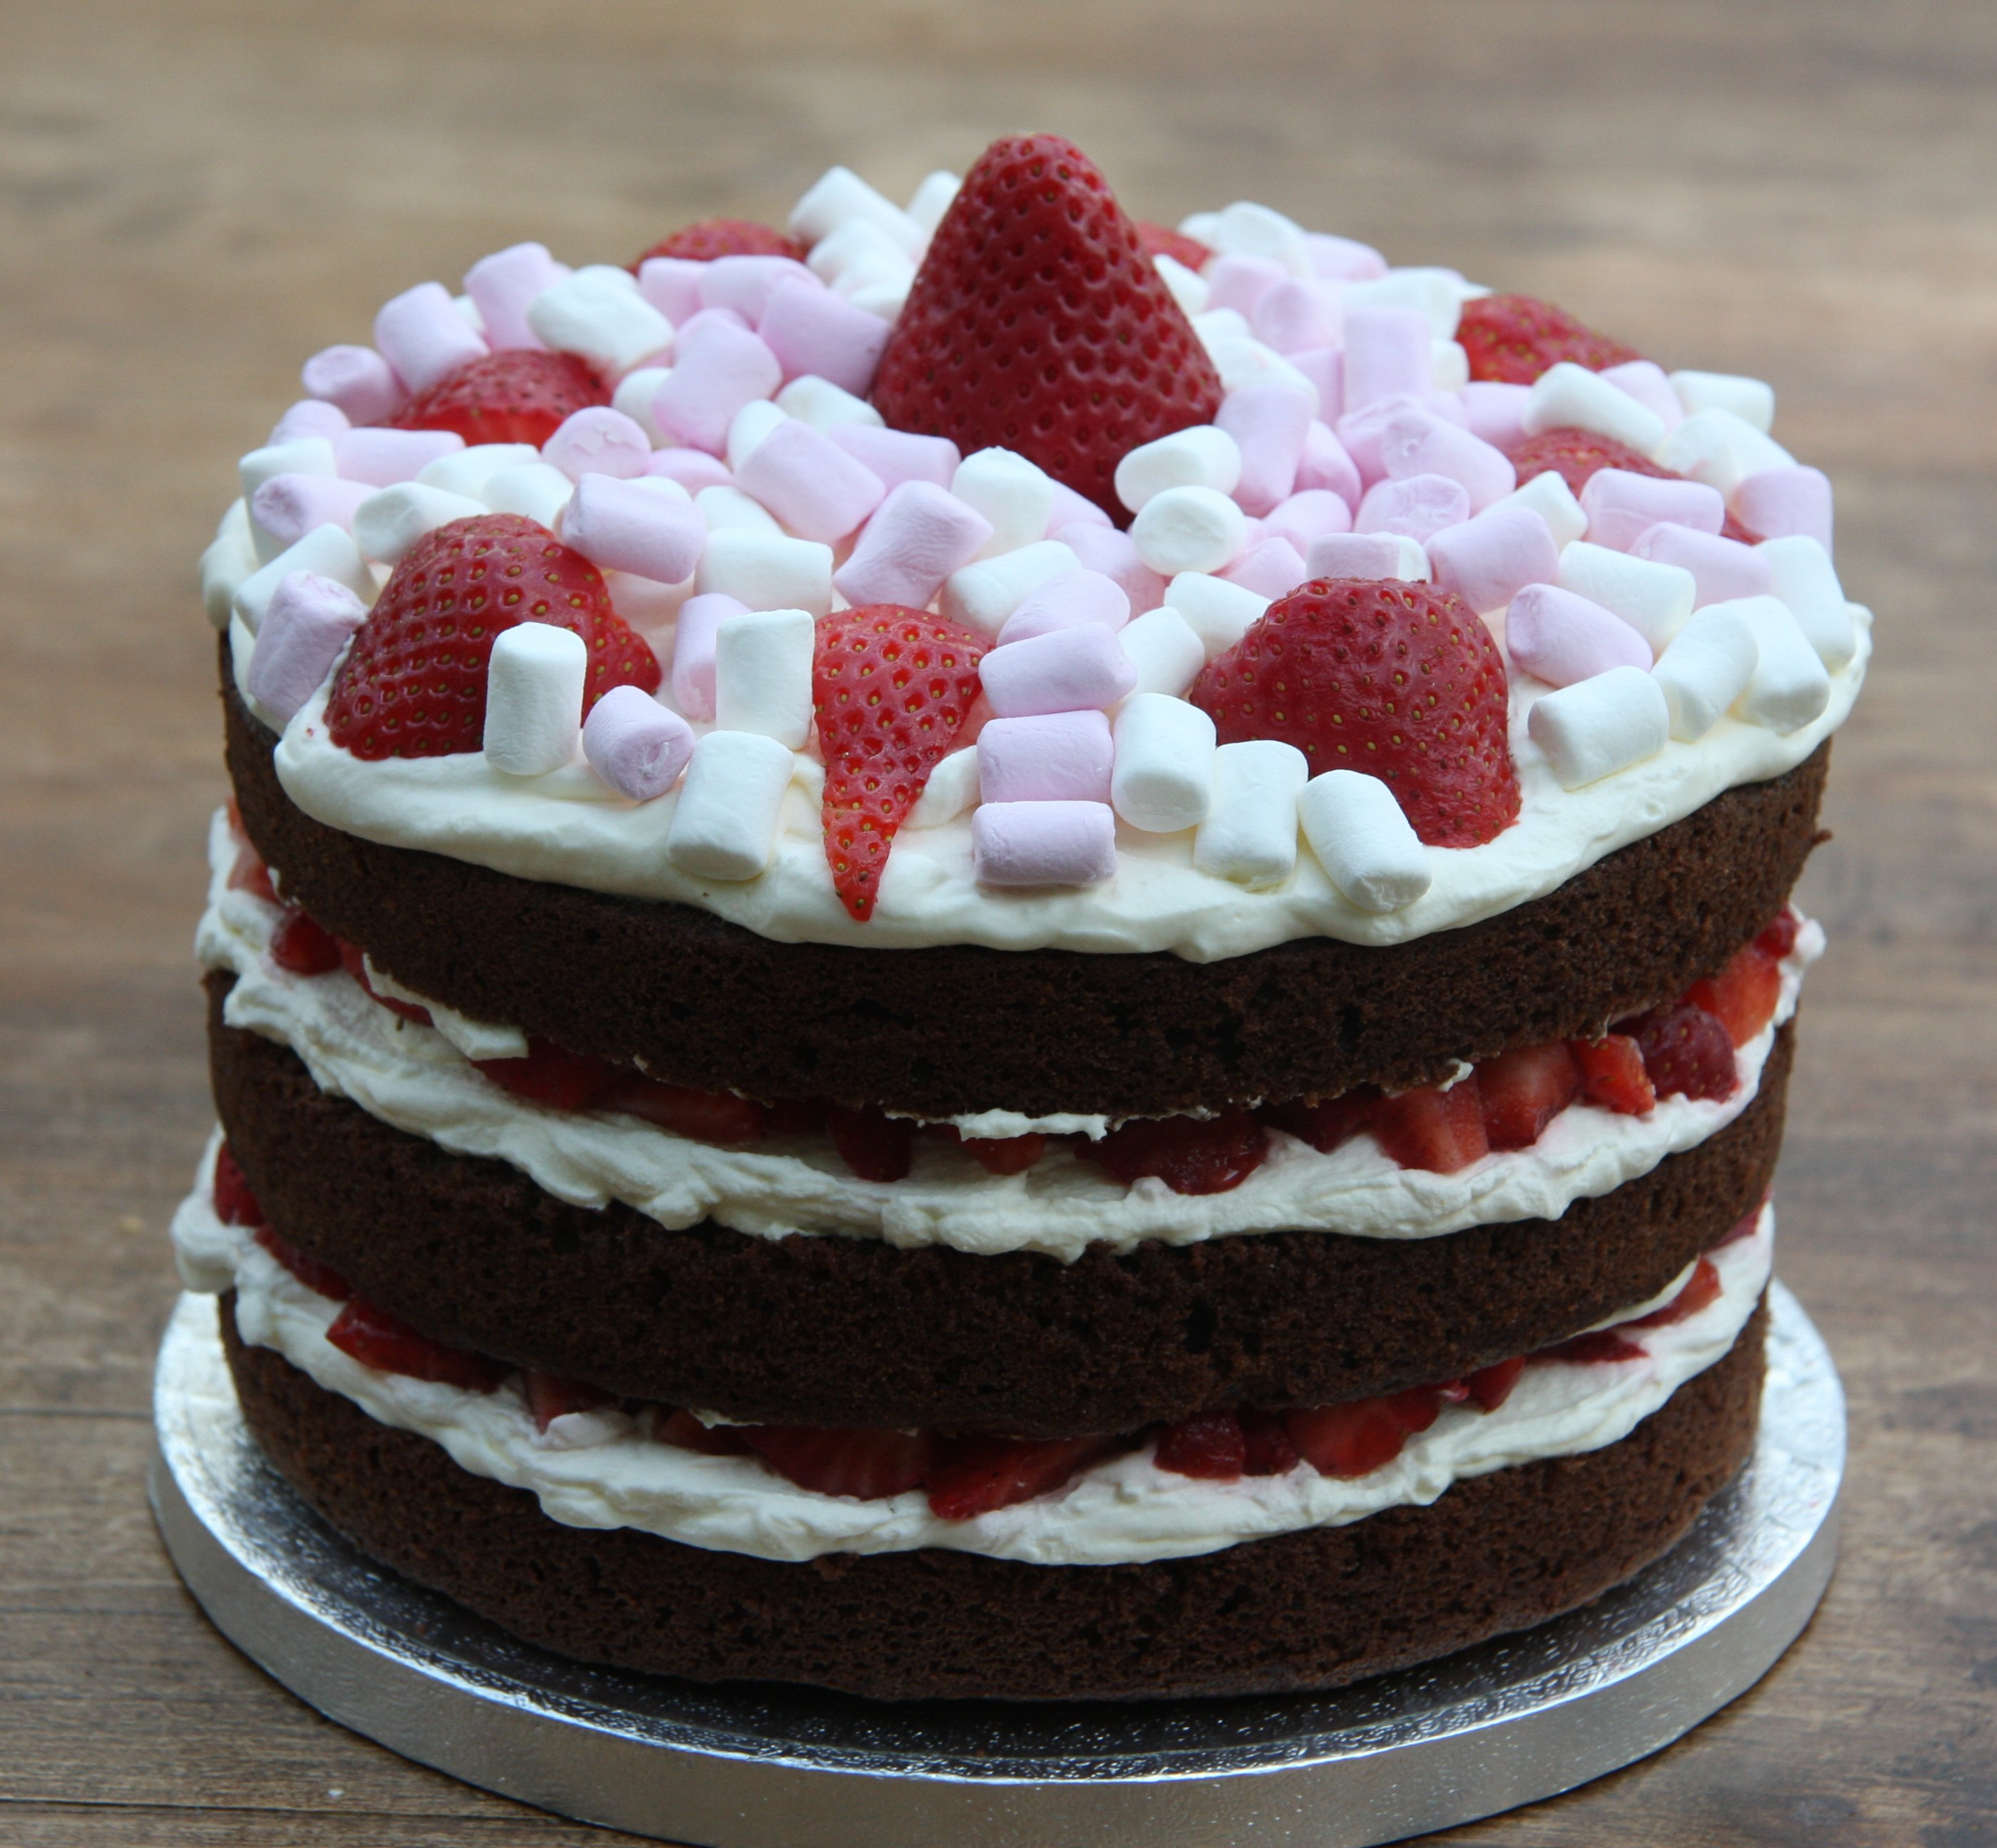 Chocolate Birthday Cake
 Chocolate Birthday Cake with Strawberries and Cream and